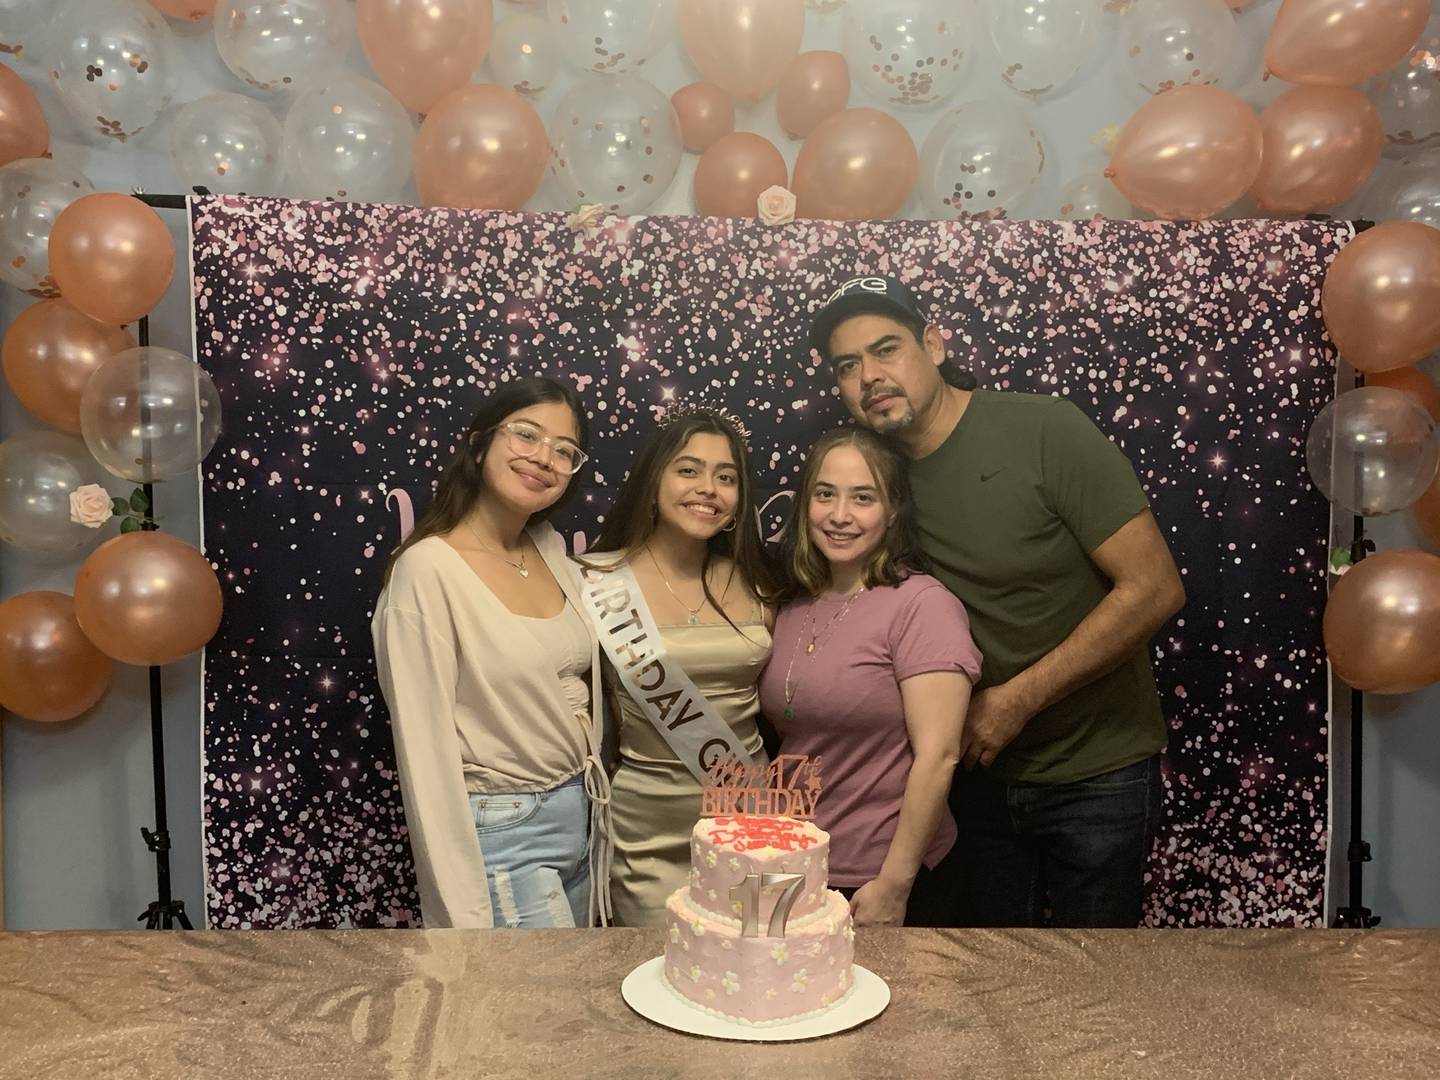 The family of Leticia Porcayo, second from right, has been fighting to get her financial access to a potentially life-saving double lung transplant as a result of COVID-19.